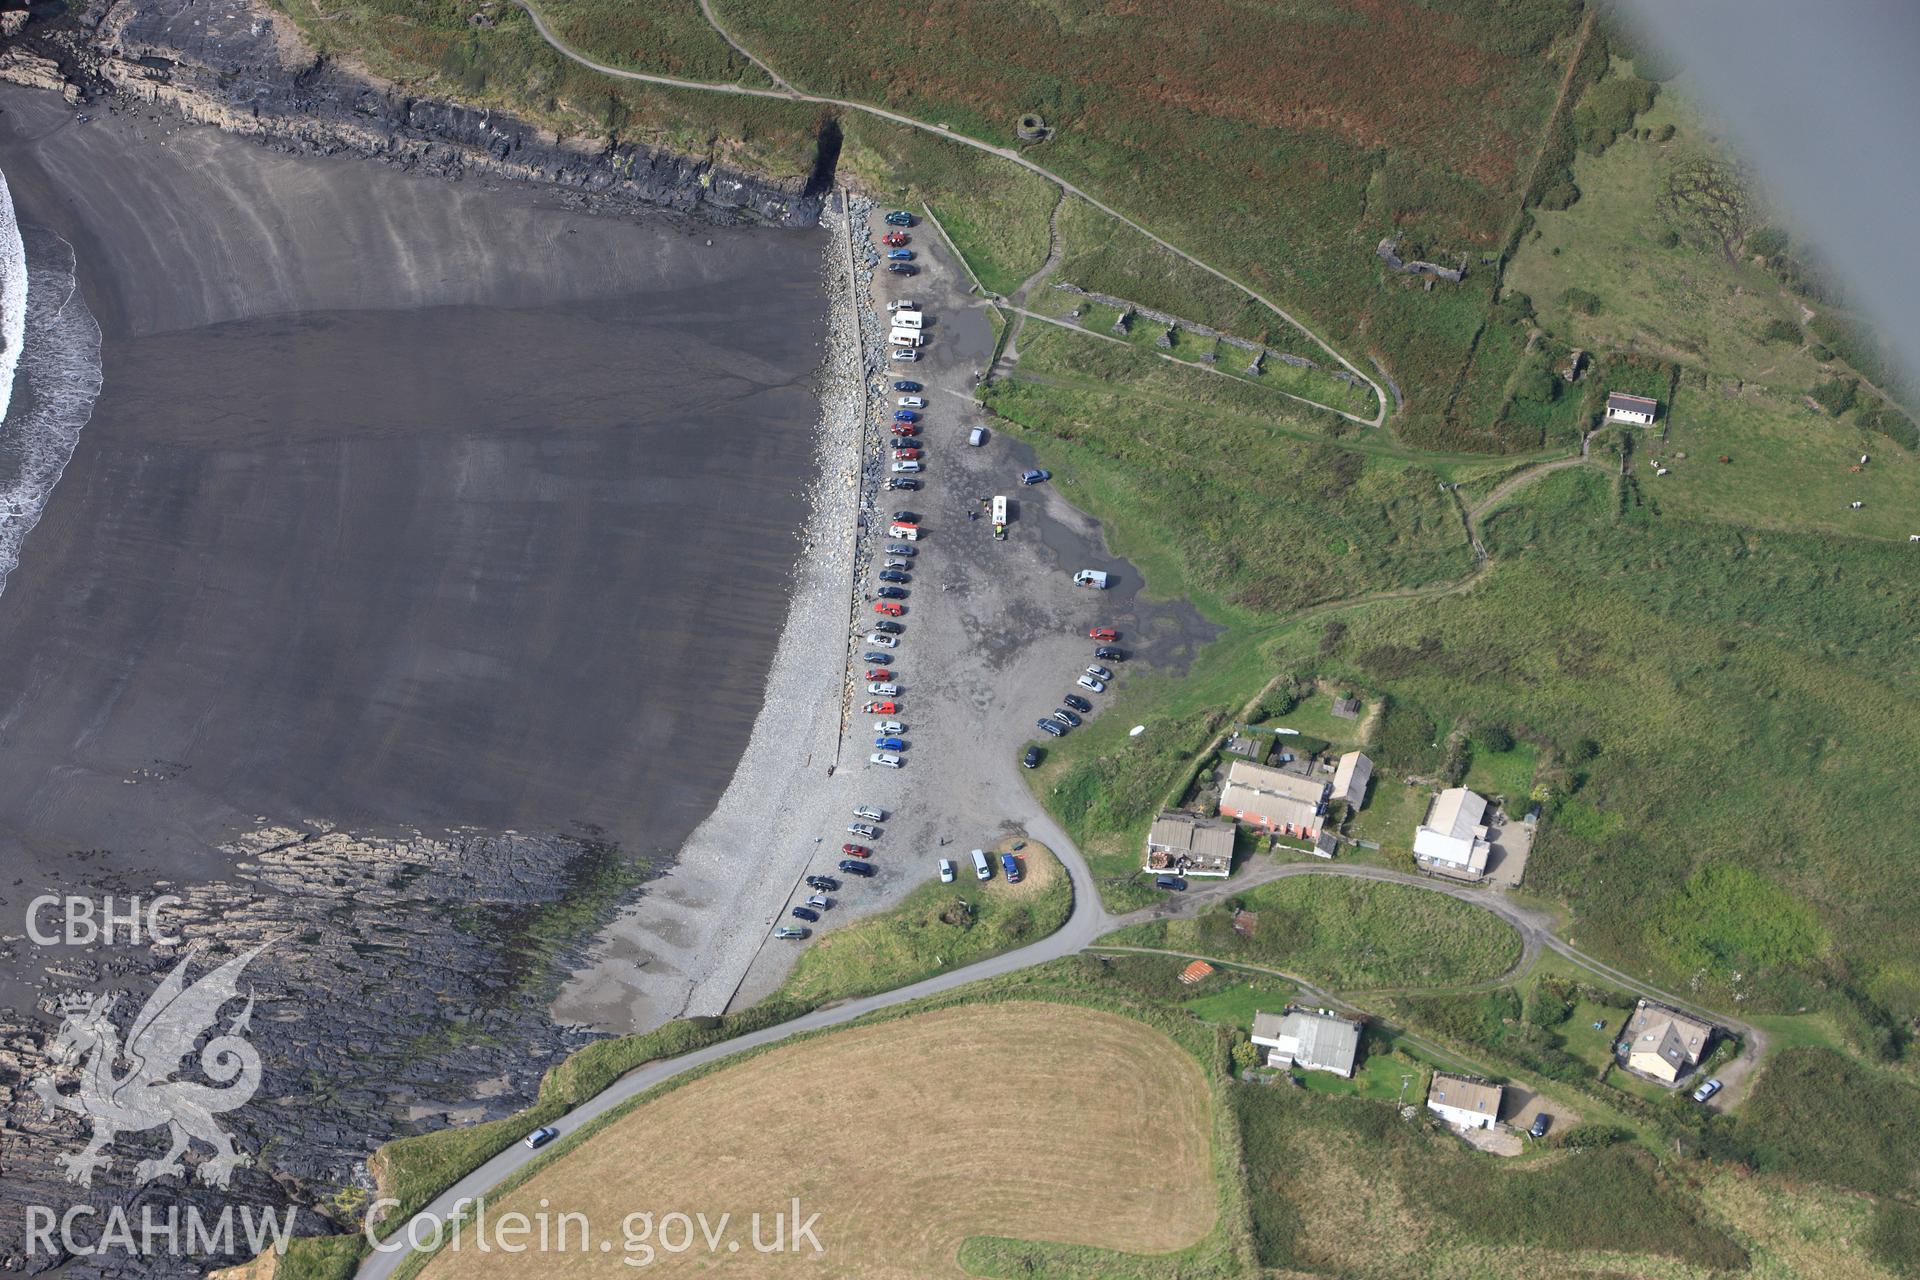 RCAHMW colour oblique photograph of Abereiddy village and industrial complex. Taken by Toby Driver on 09/09/2010.